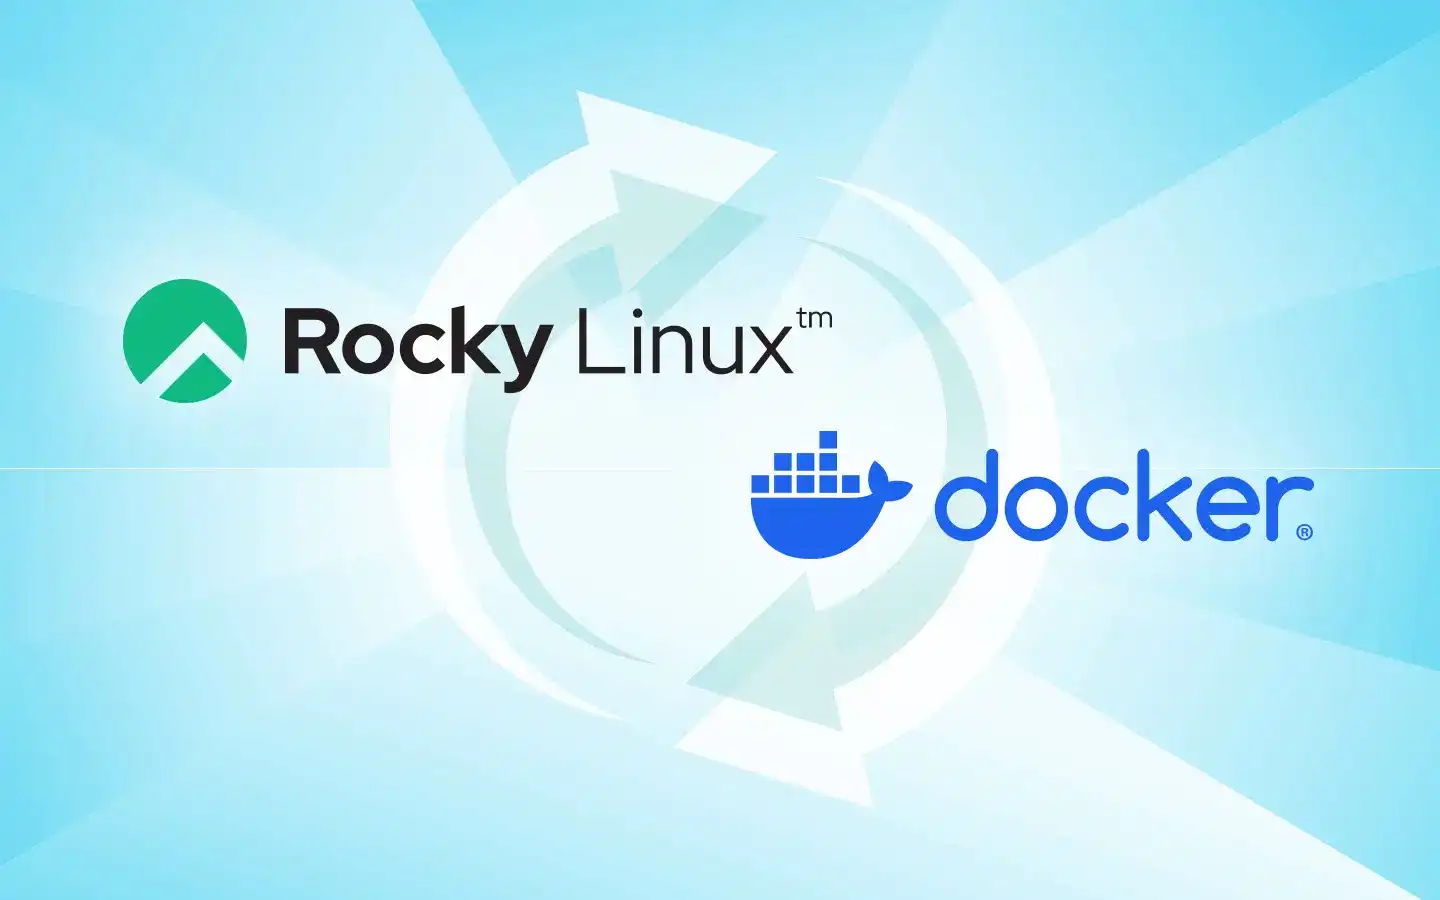 How to Deploy and Use the Rocky Linux Docker Image